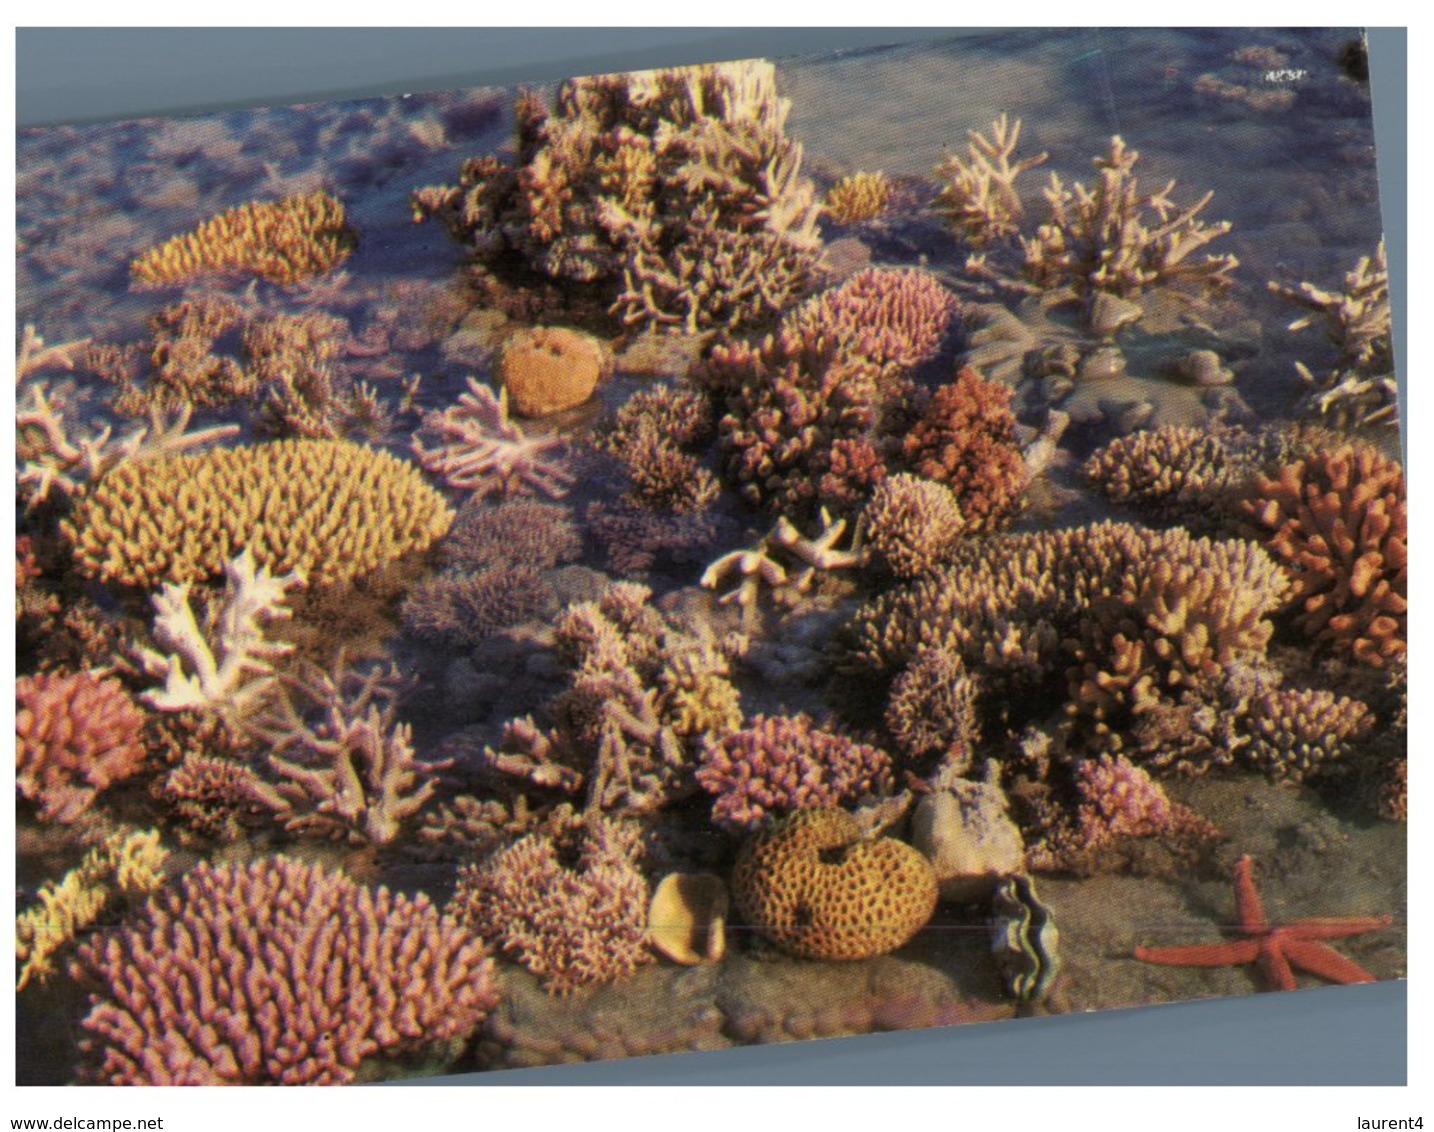 (333) Australia - QLD - Great Barrier Reef Corals - Great Barrier Reef